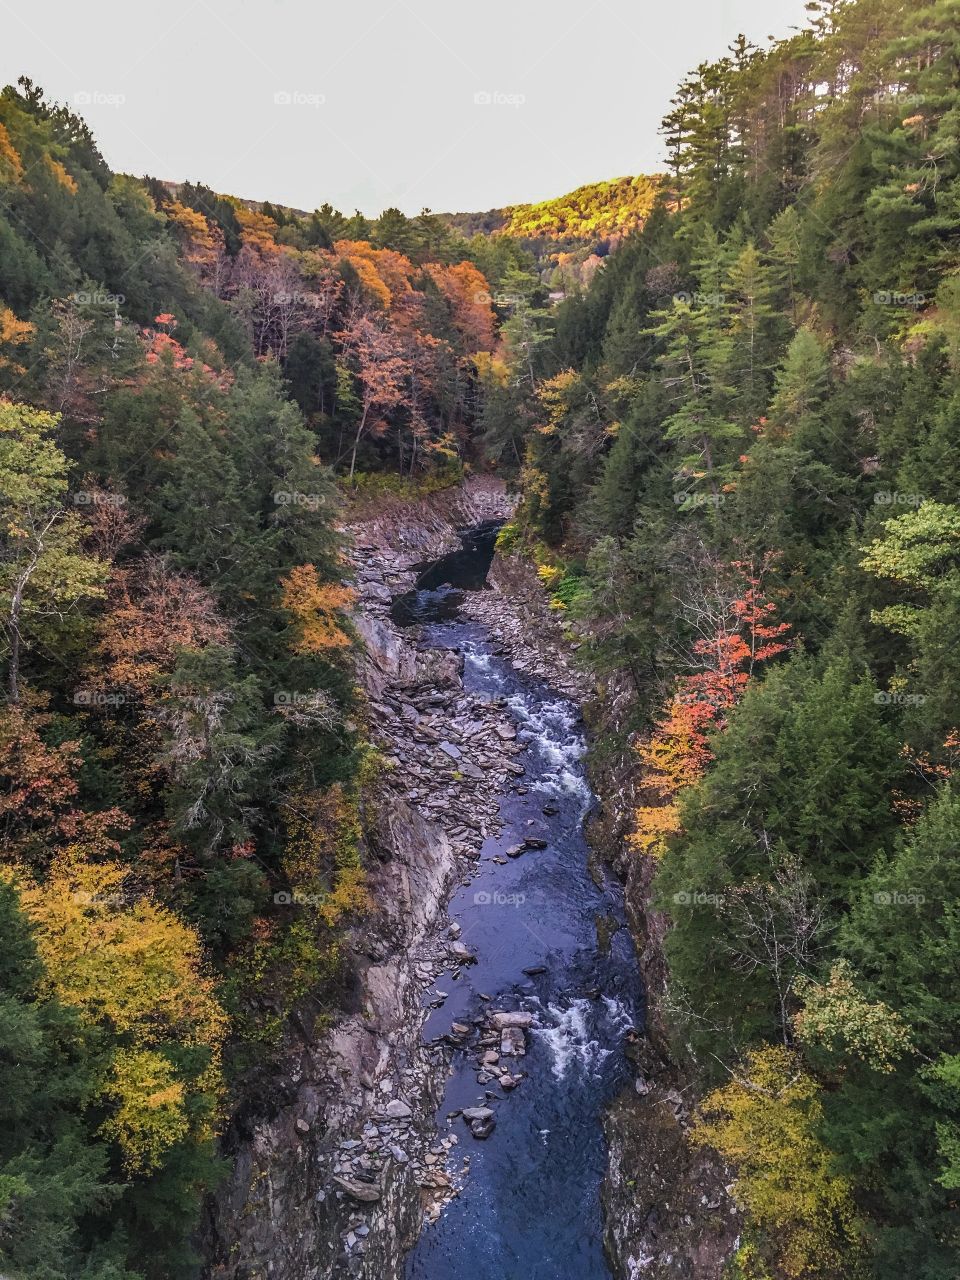 Fall beauty of Vermont - Quechee Gorge is turned almost purple in the wake of the setting sun, with the leaves just starting to change. 